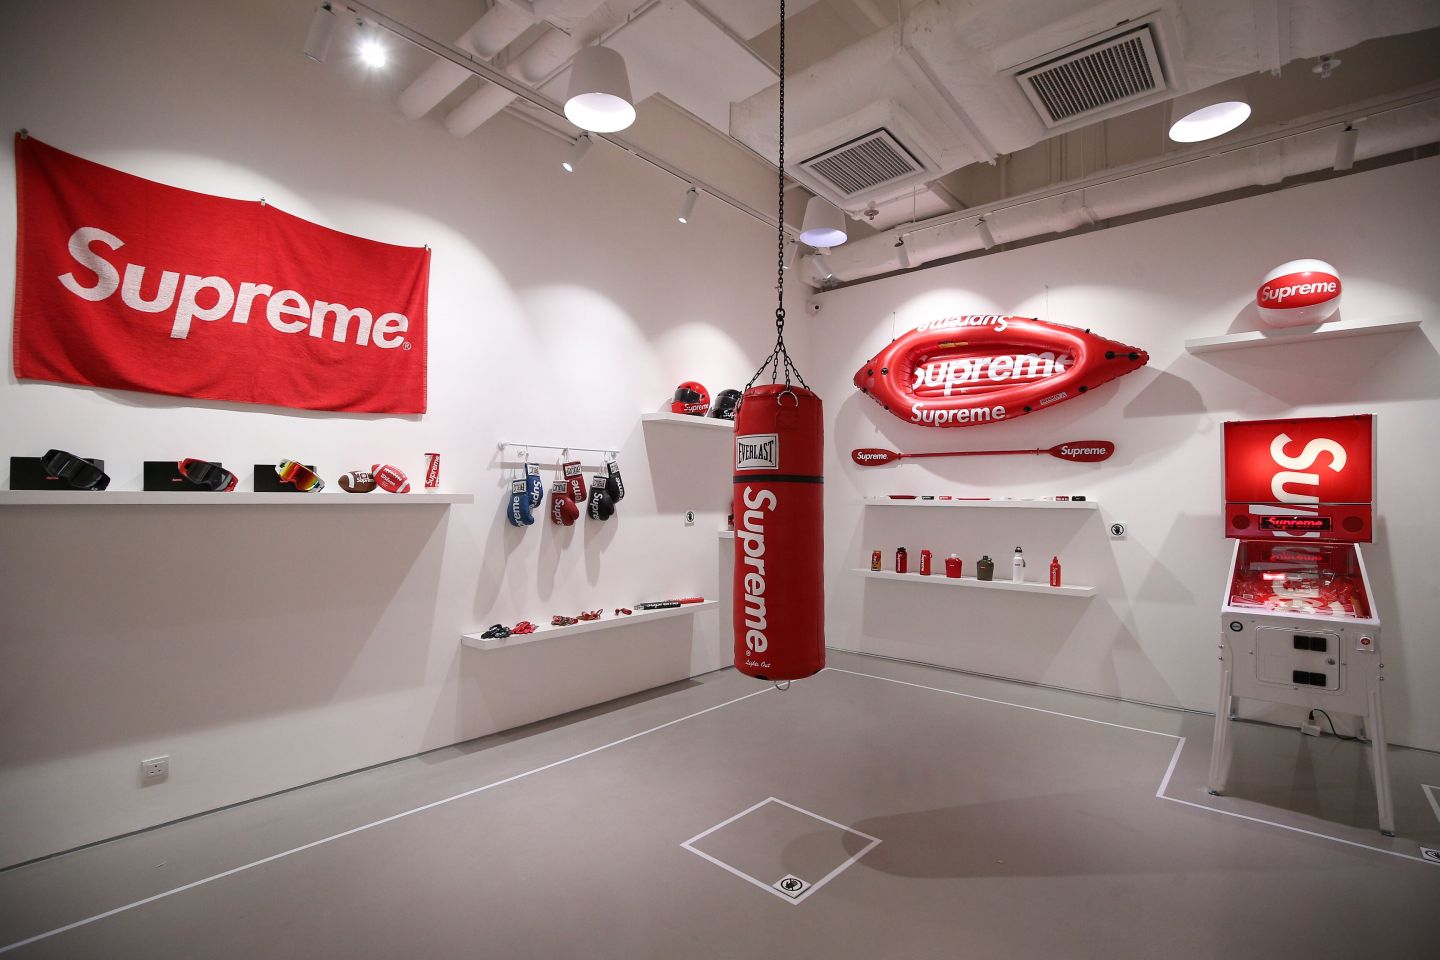 A GROUP OF 5 SUPREME BASEBALL ACCESSORIES, The Supreme Vault: 1998 - 2018, Contemporary Art